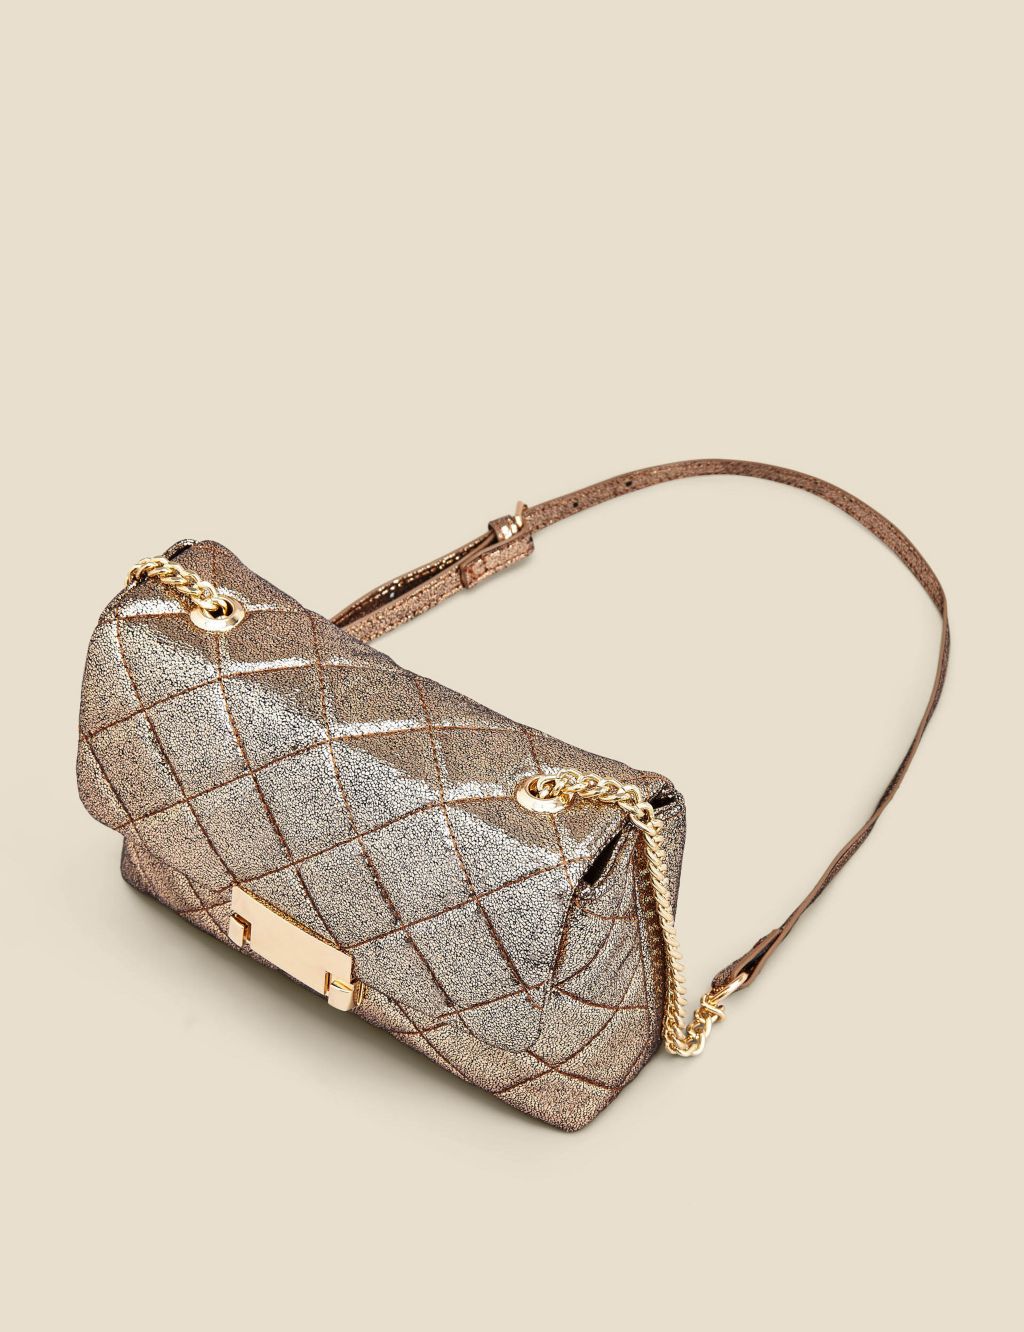 Quilted Metallic Chain Strap Cross Body Bag image 4